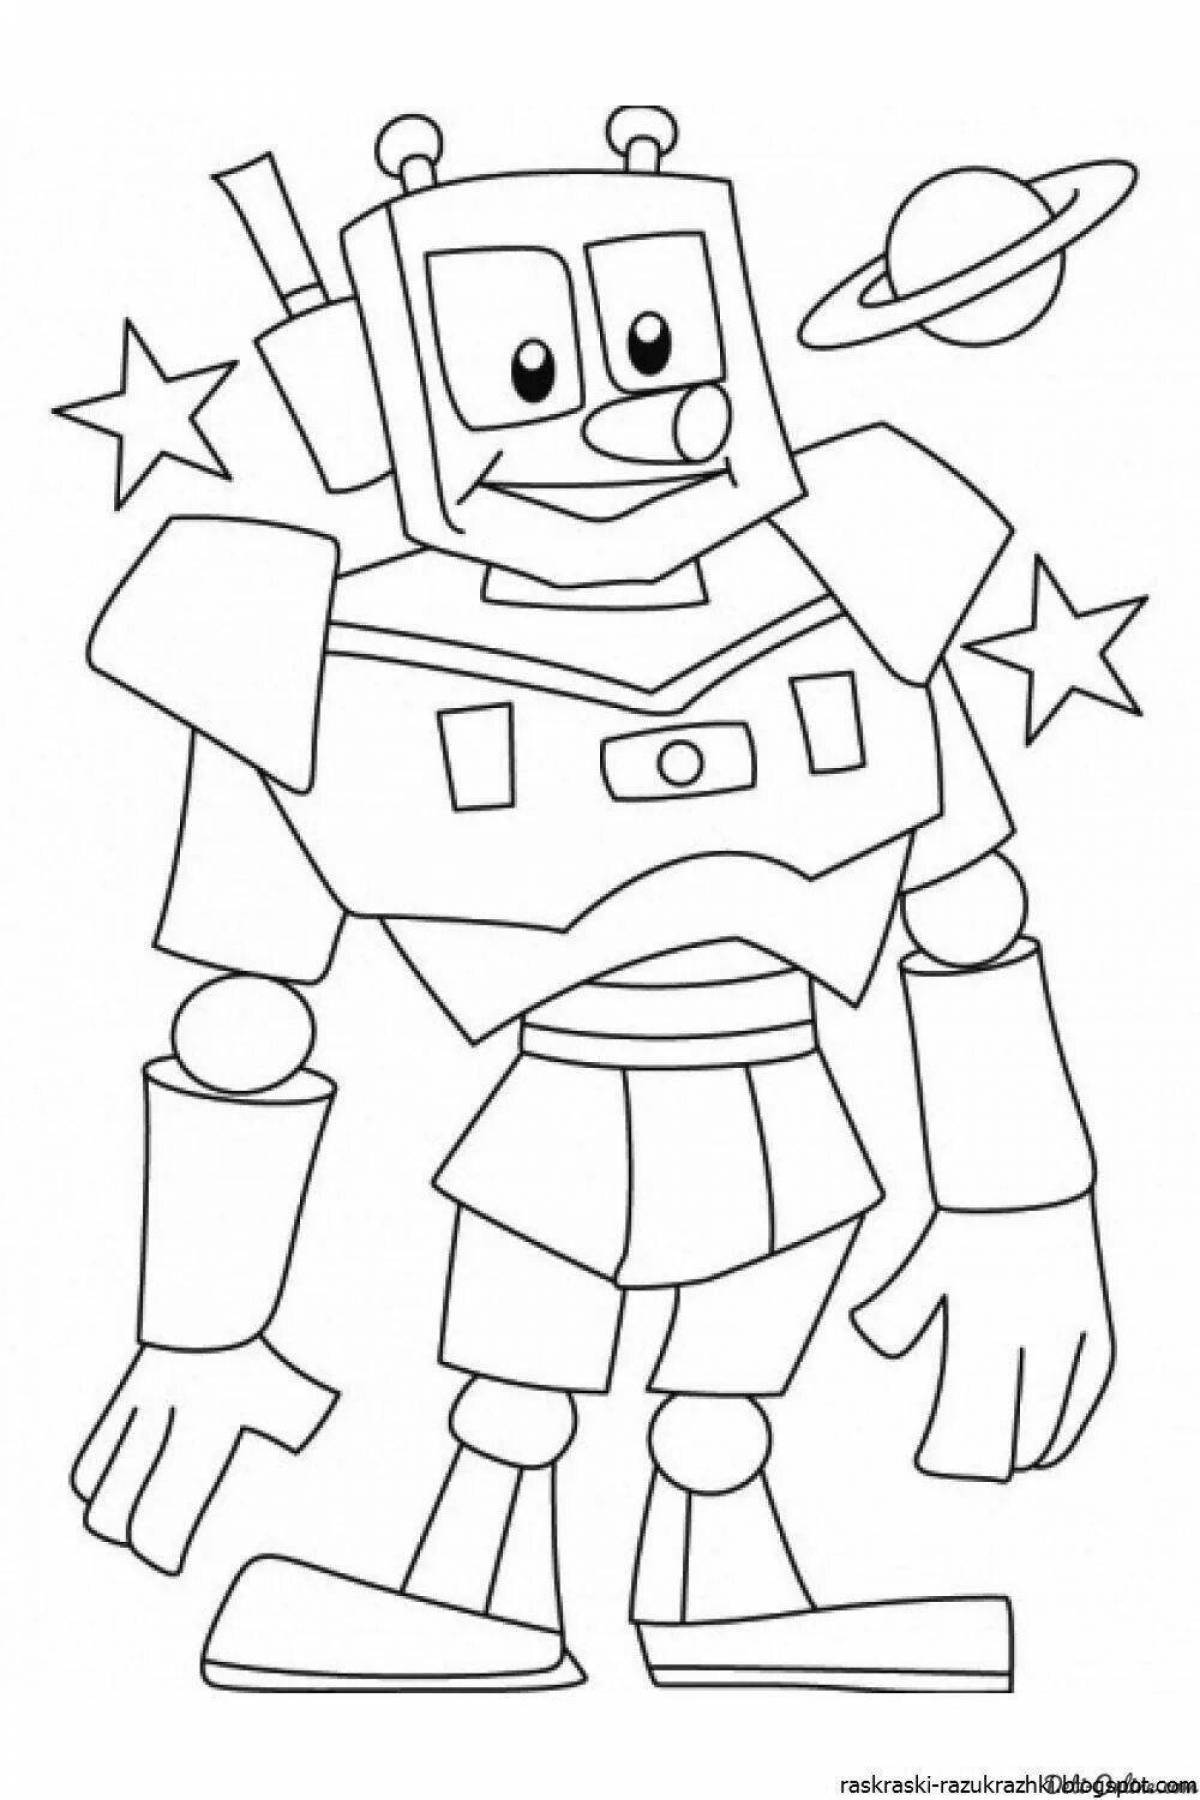 Gorgeous robots coloring for boys 6-7 years old